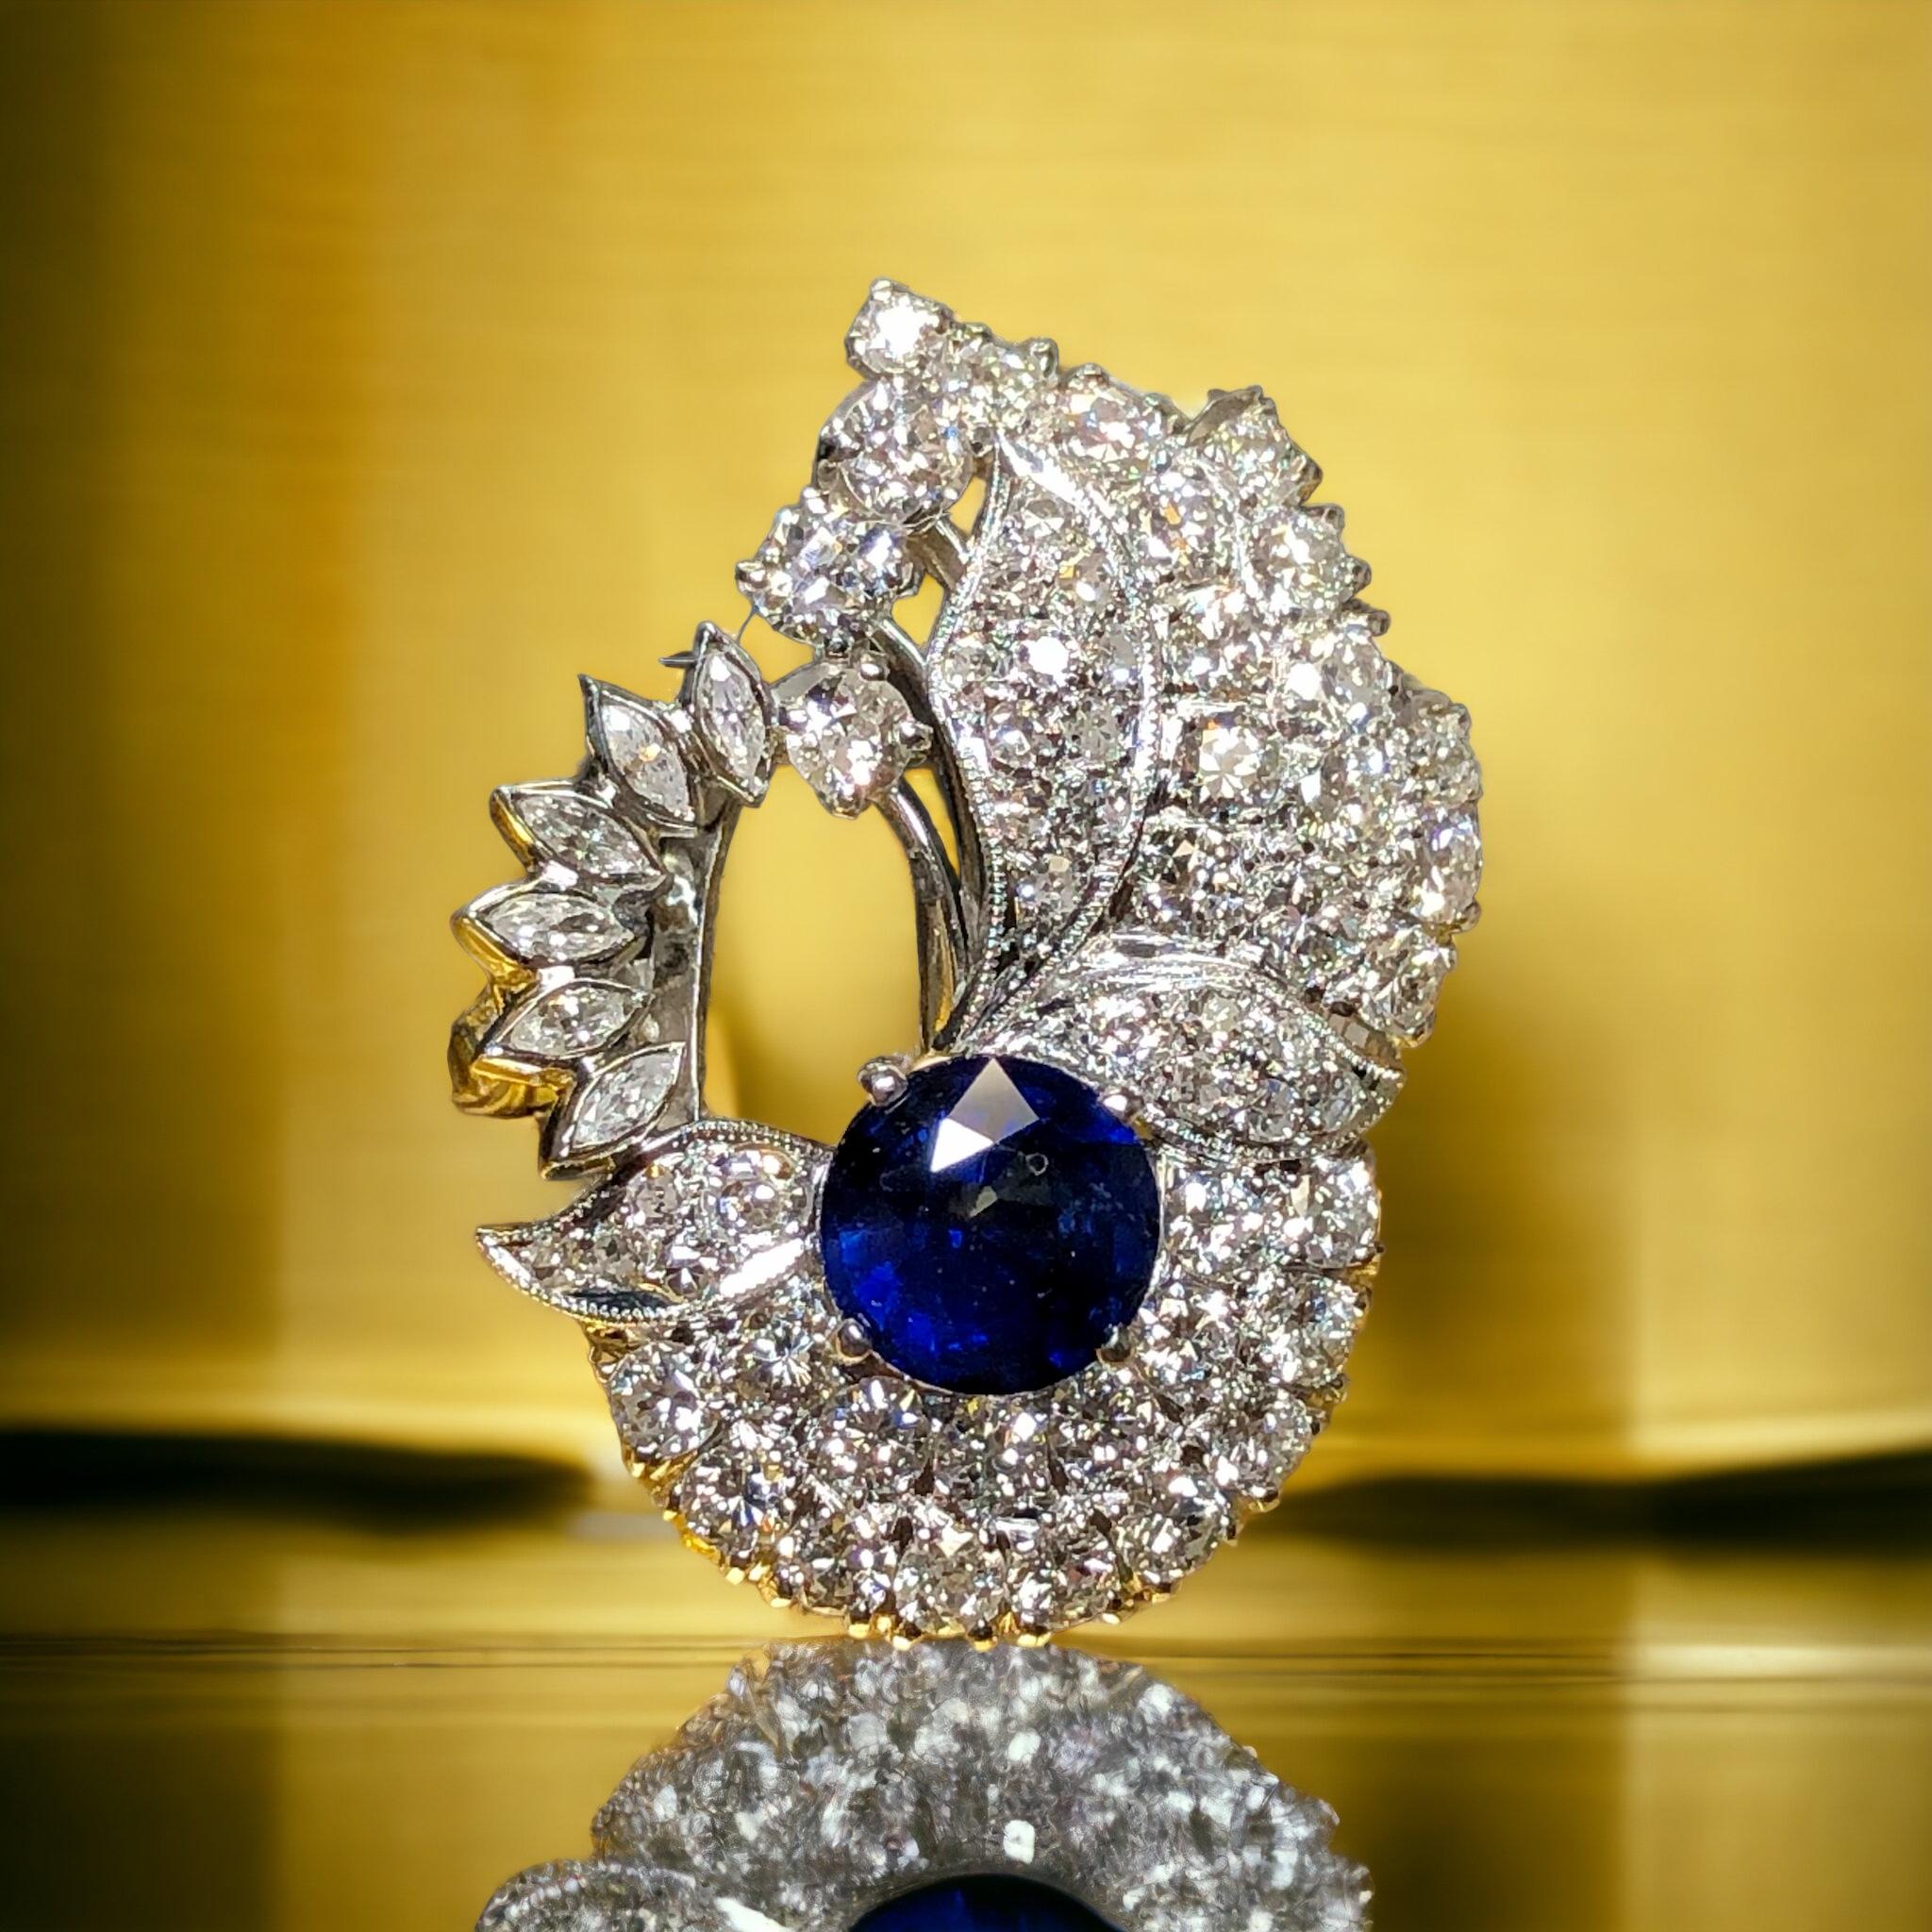 This ring is just gorgeous! Circa the 1940’s, It has been hand done in platinum and centered by a 1.54ct (known weight) natural sapphire surrounded by approximately 2.60cttw in G-H color Vs1-2 clarity old European, mine cut and marquise diamonds.